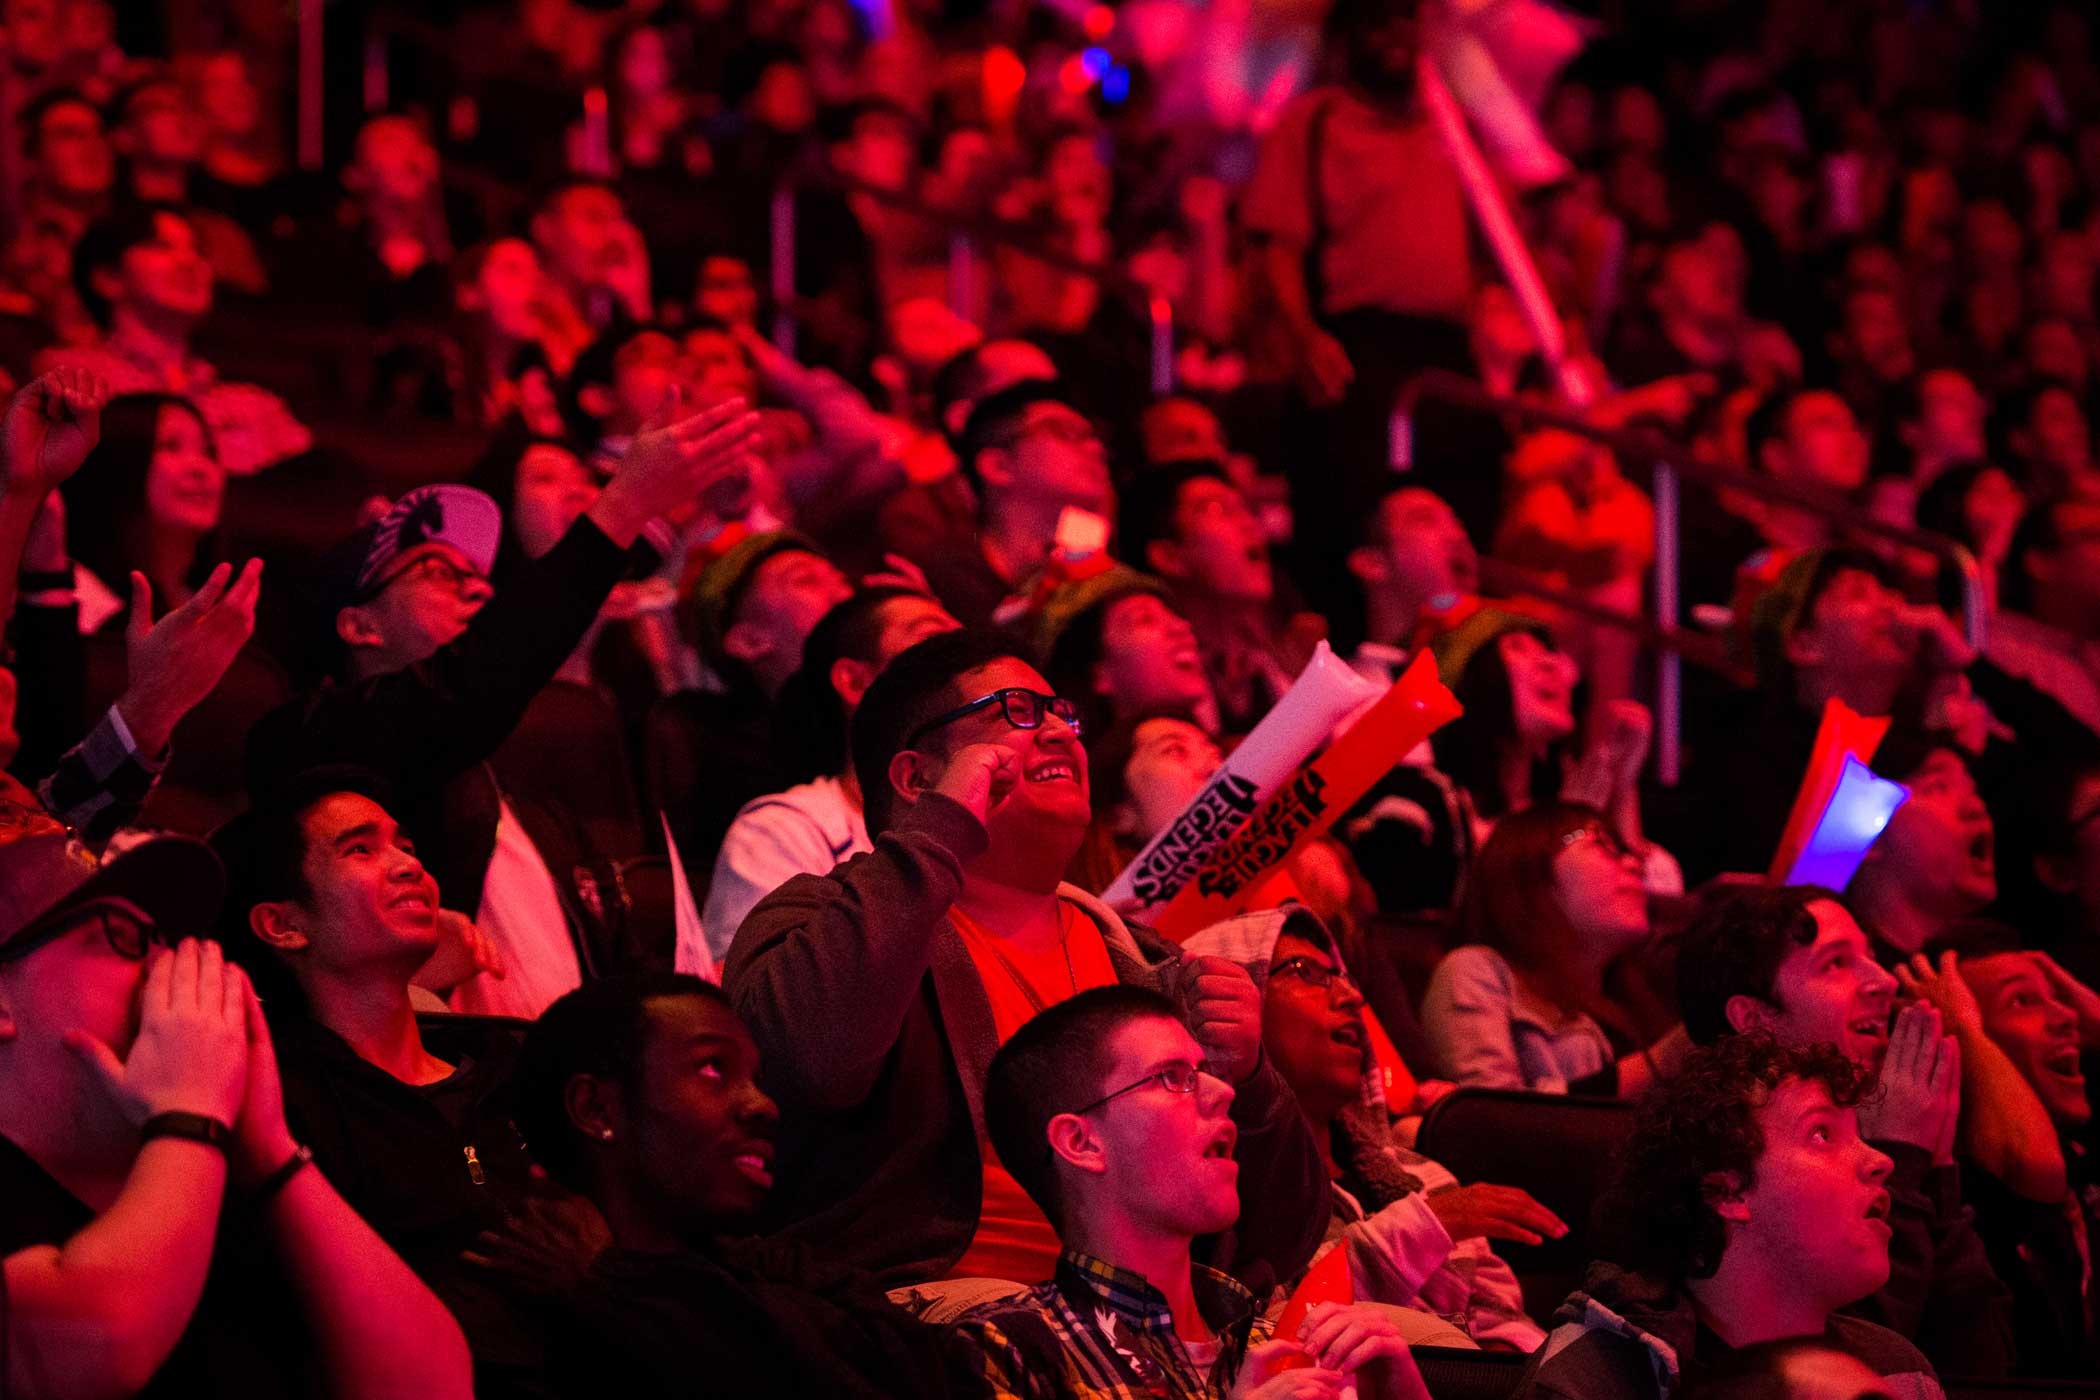 Fans cheer during the first semifinal match between SK Telecom T1 and ROX Tigers on Friday night at Madison Square Garden. Mark Kauzlarich for TIME